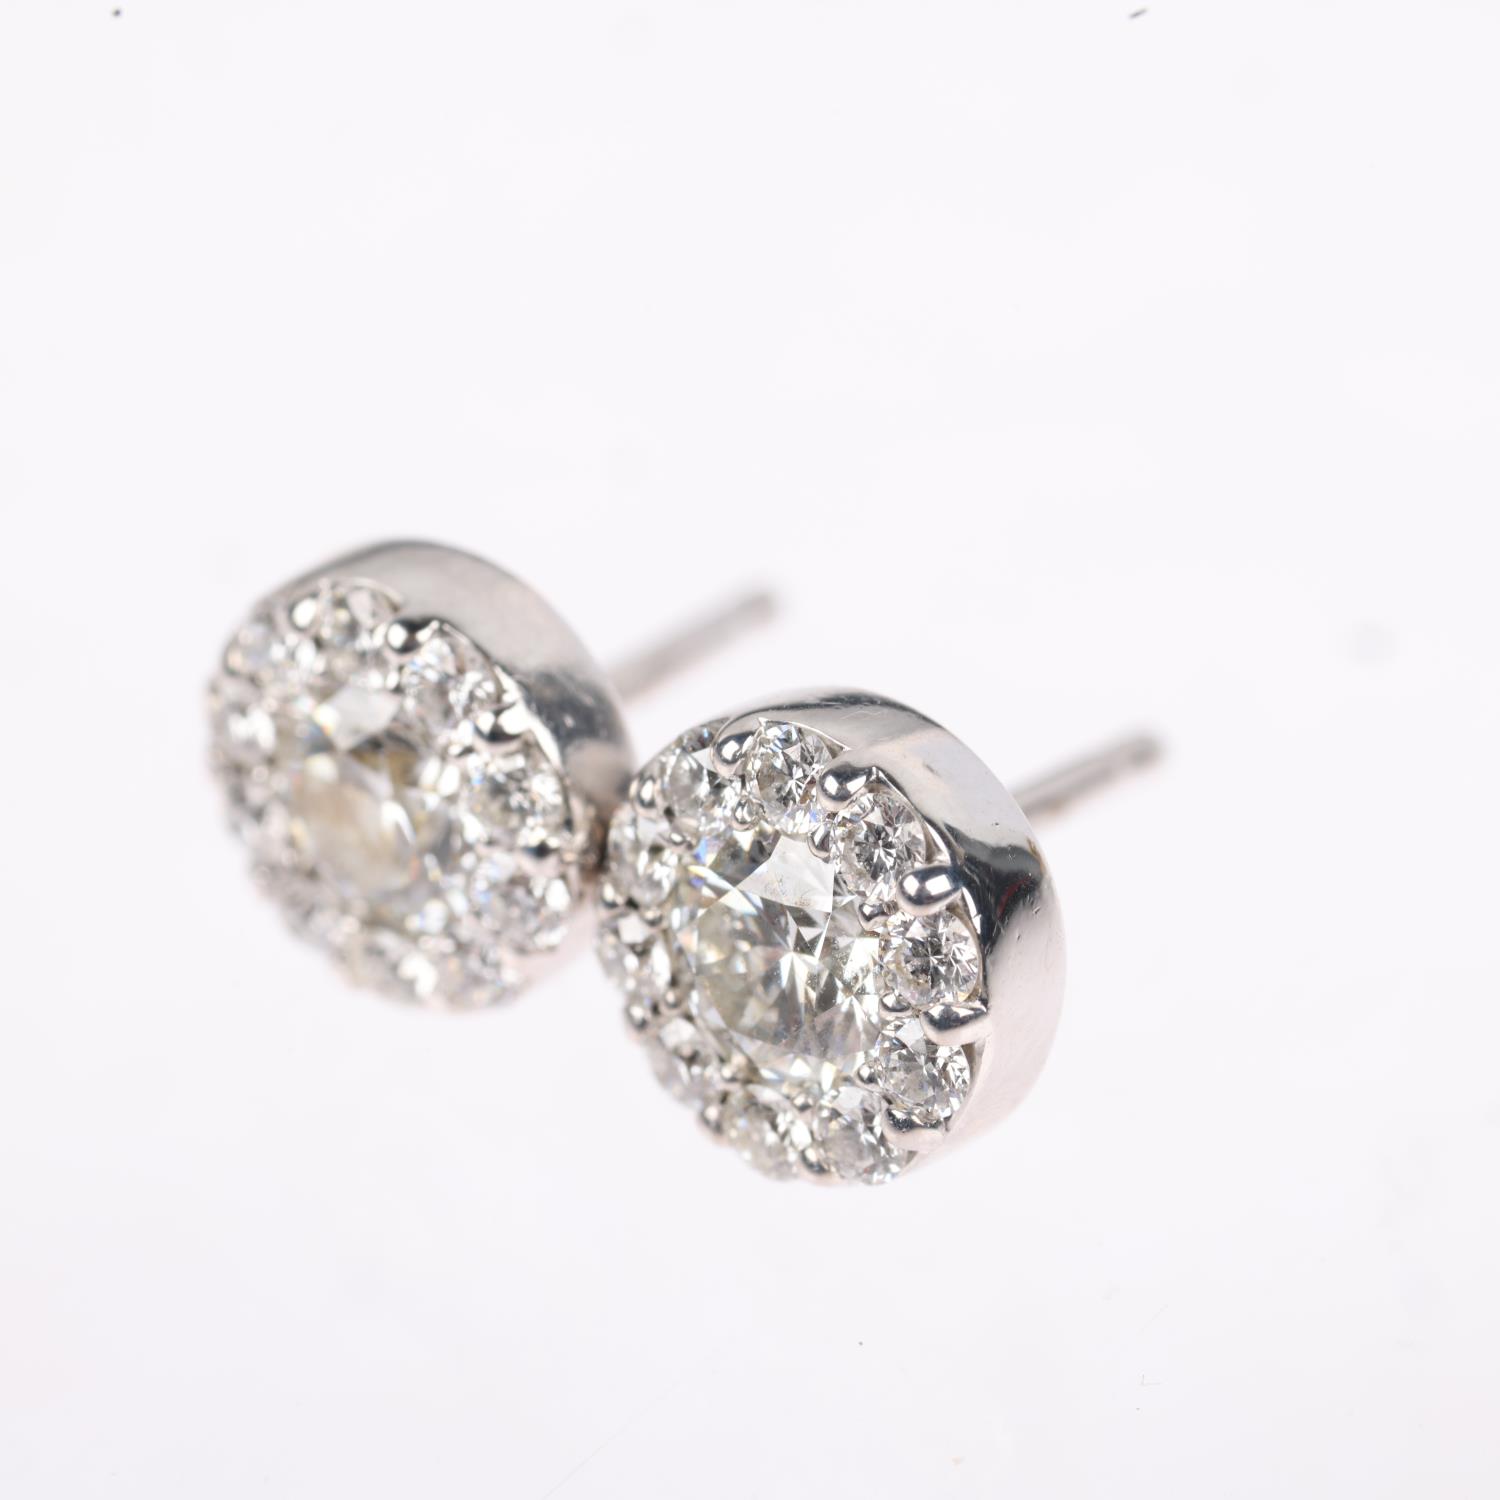 HEARTS ON FIRE - a pair of 18ct white gold diamond 'Fulfillment' cluster stud earrings, maker HOF - Image 2 of 4